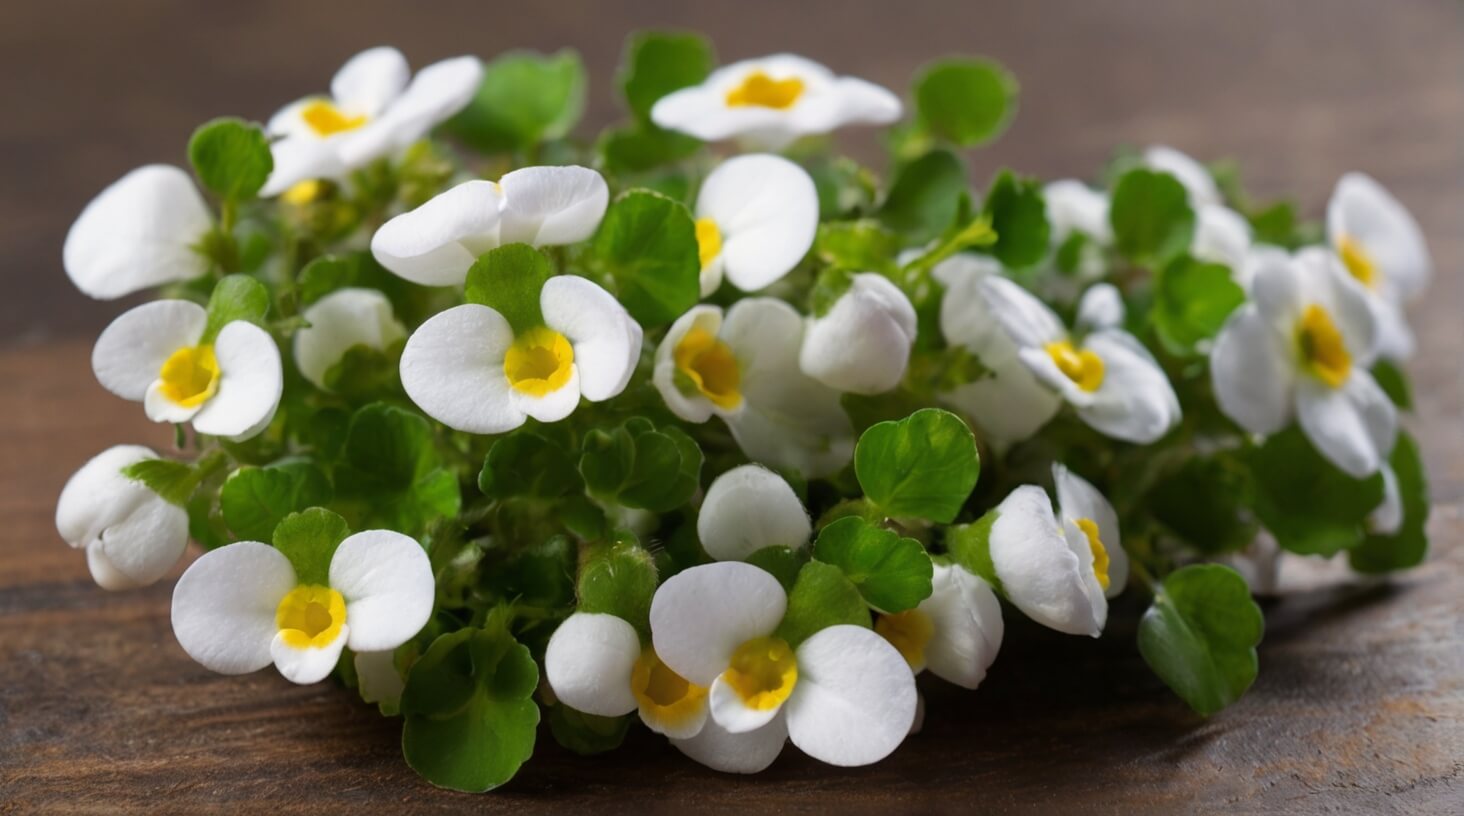 A close-up image of Bacopa Monnieri leaves